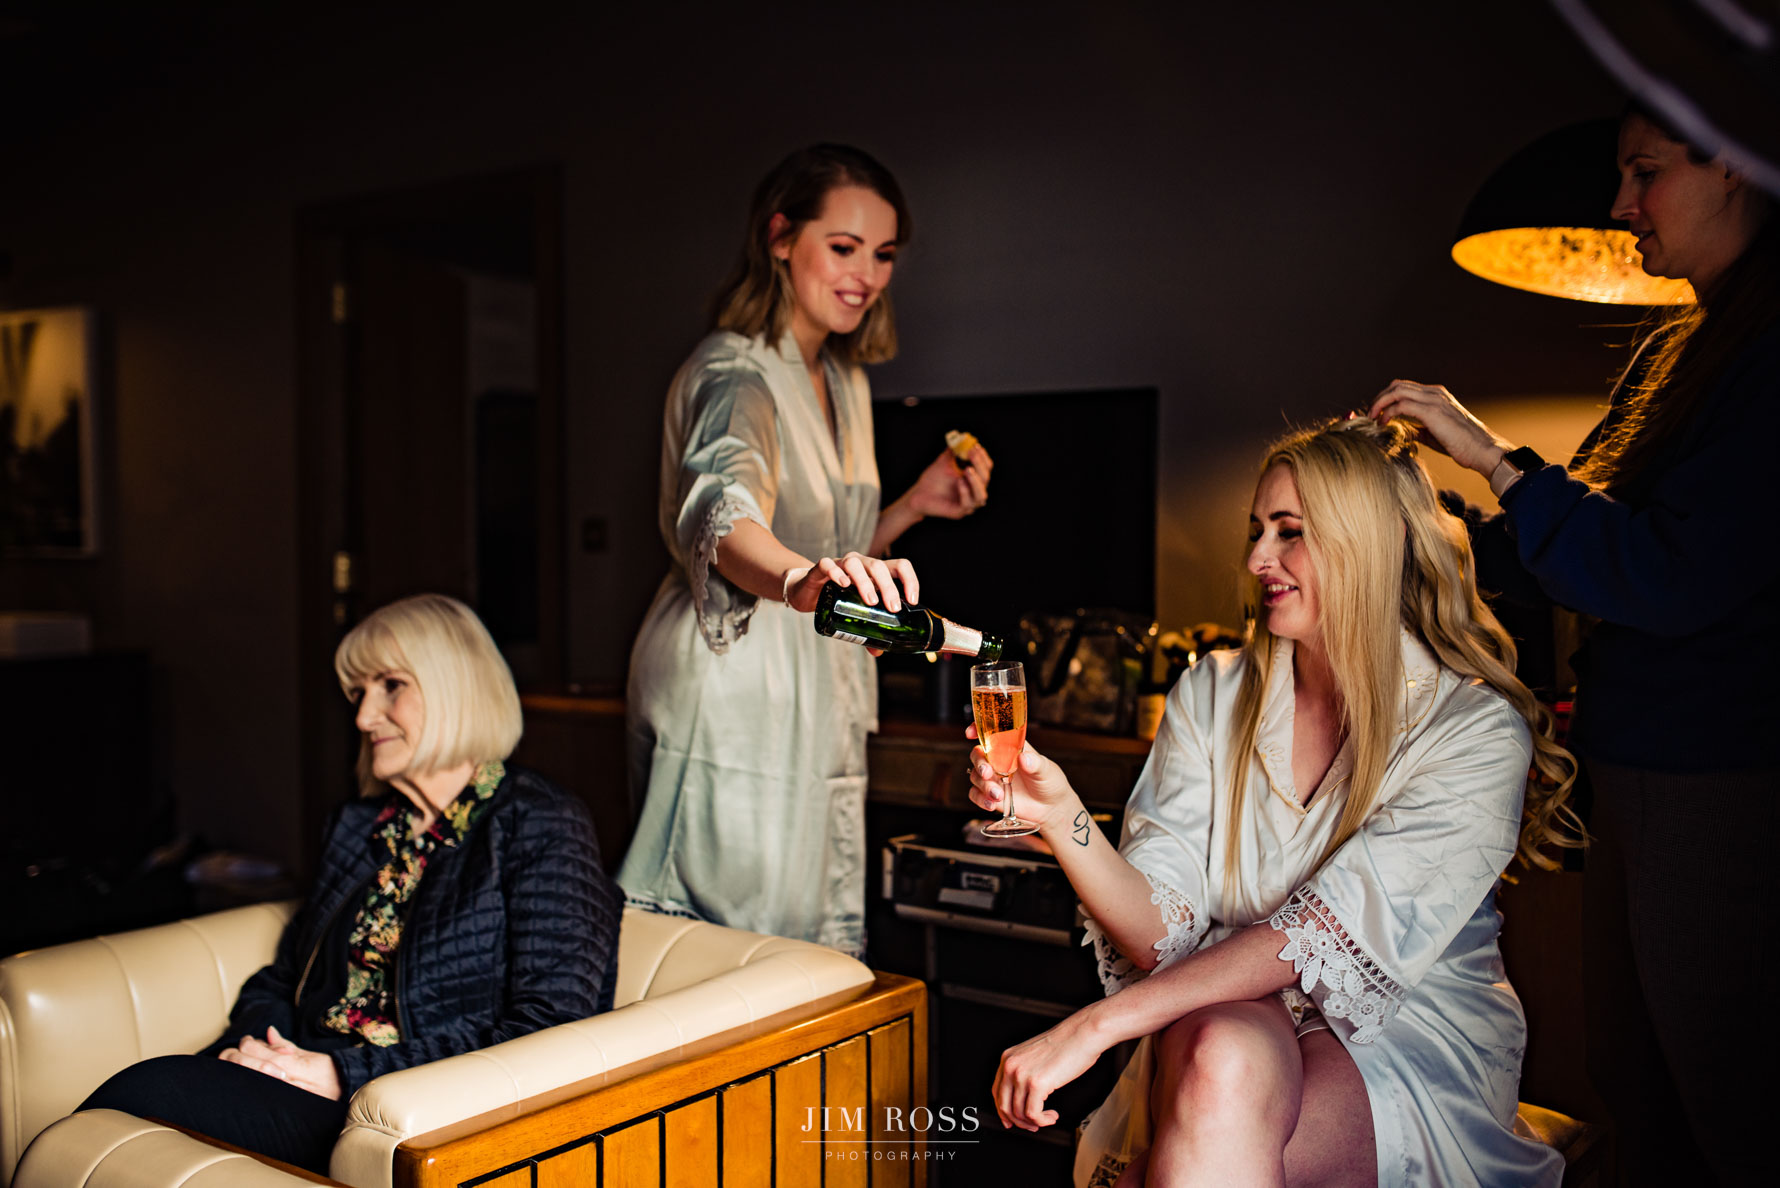 Topping up bride's champagne